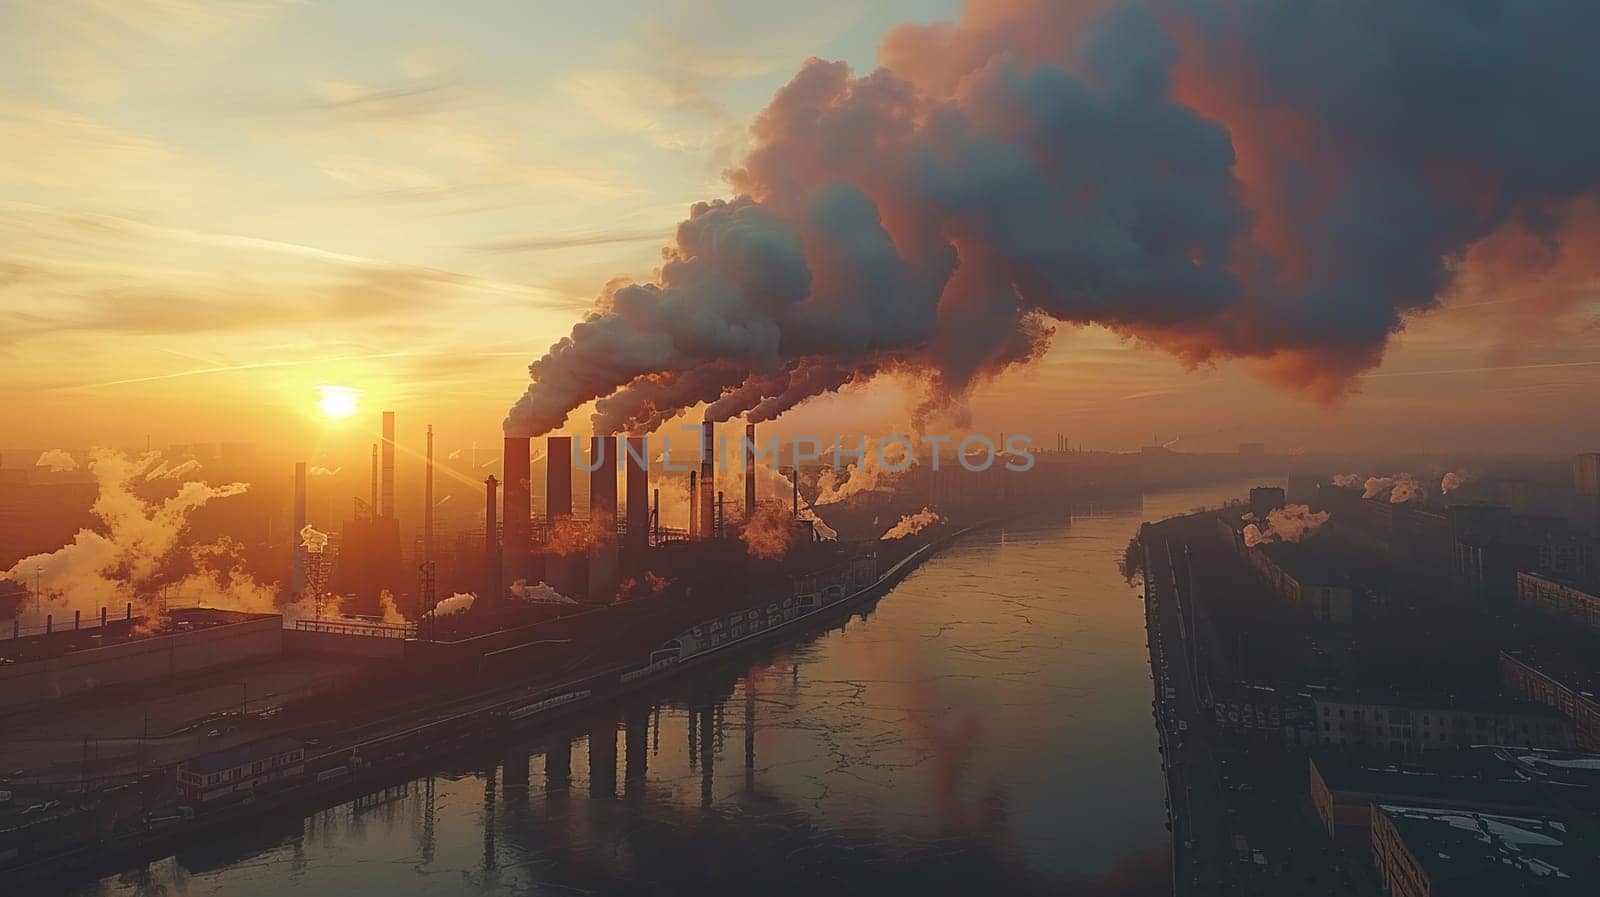 A city skyline with smoke billowing from the factories. Scene is bleak and polluted